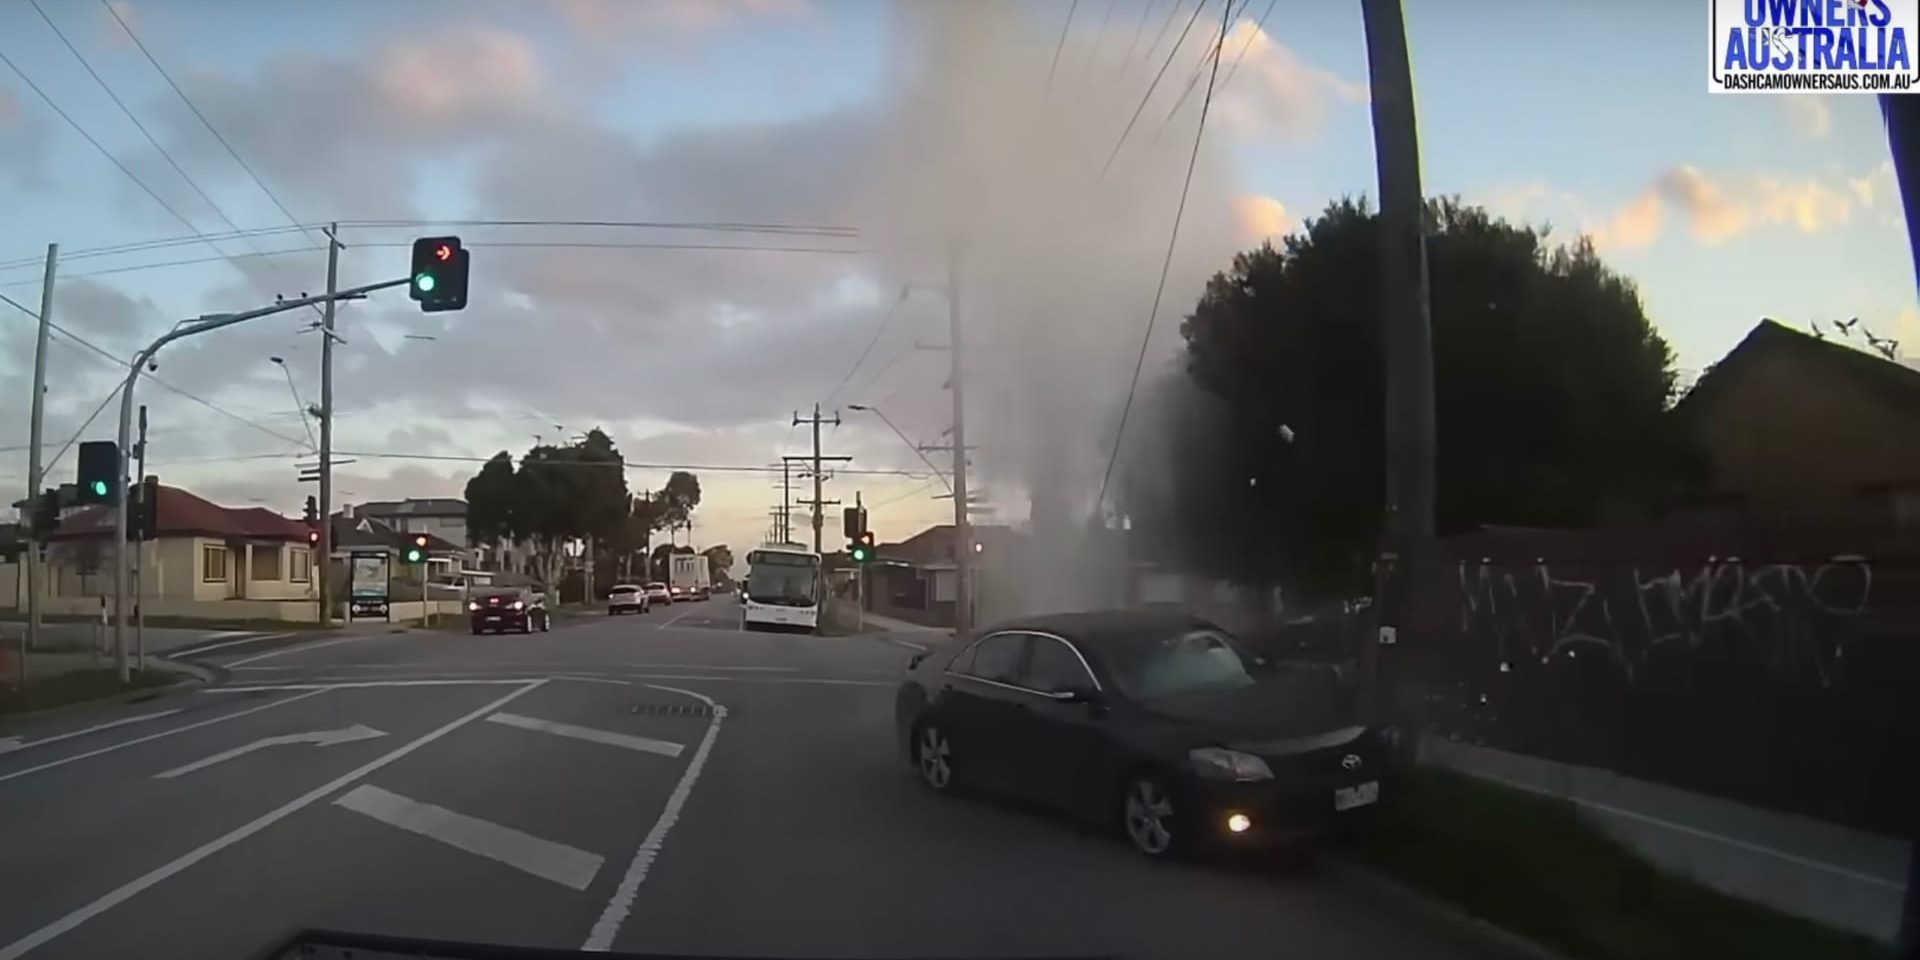 Video: Road-rage driver caught on dash-cam, crashes into fire hydrant